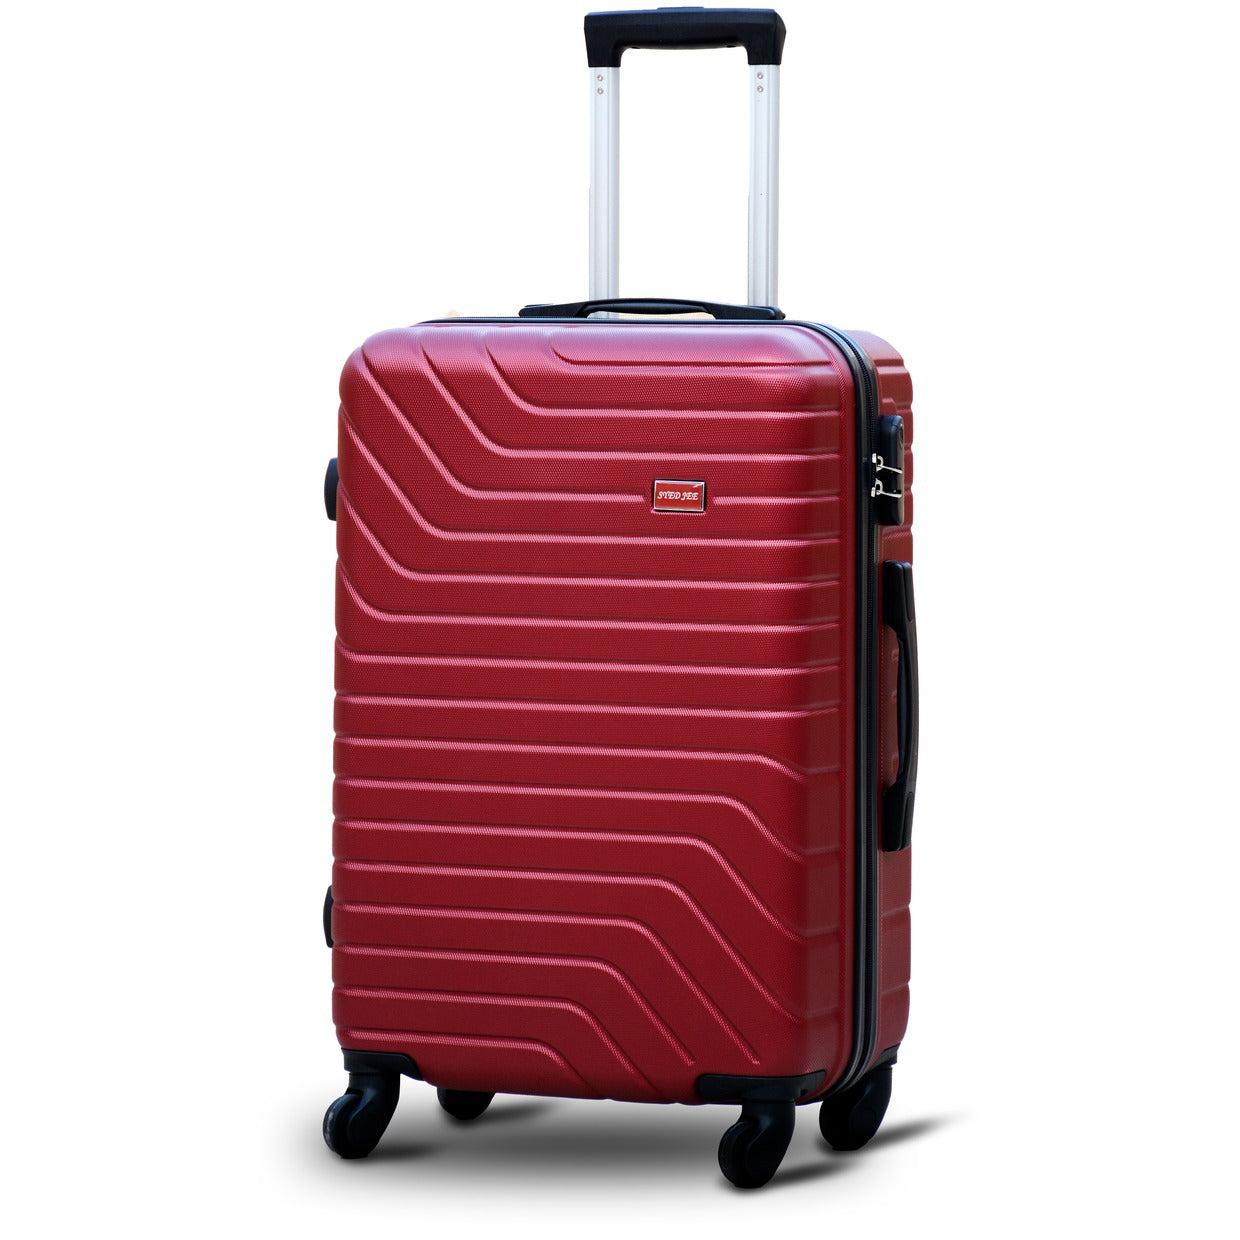 3 Piece Full Set 20" 24" 28 Inches SJ ABS Luggage Red Colour Lightweight Hard Case Trolley Bag | 2 Year Warranty